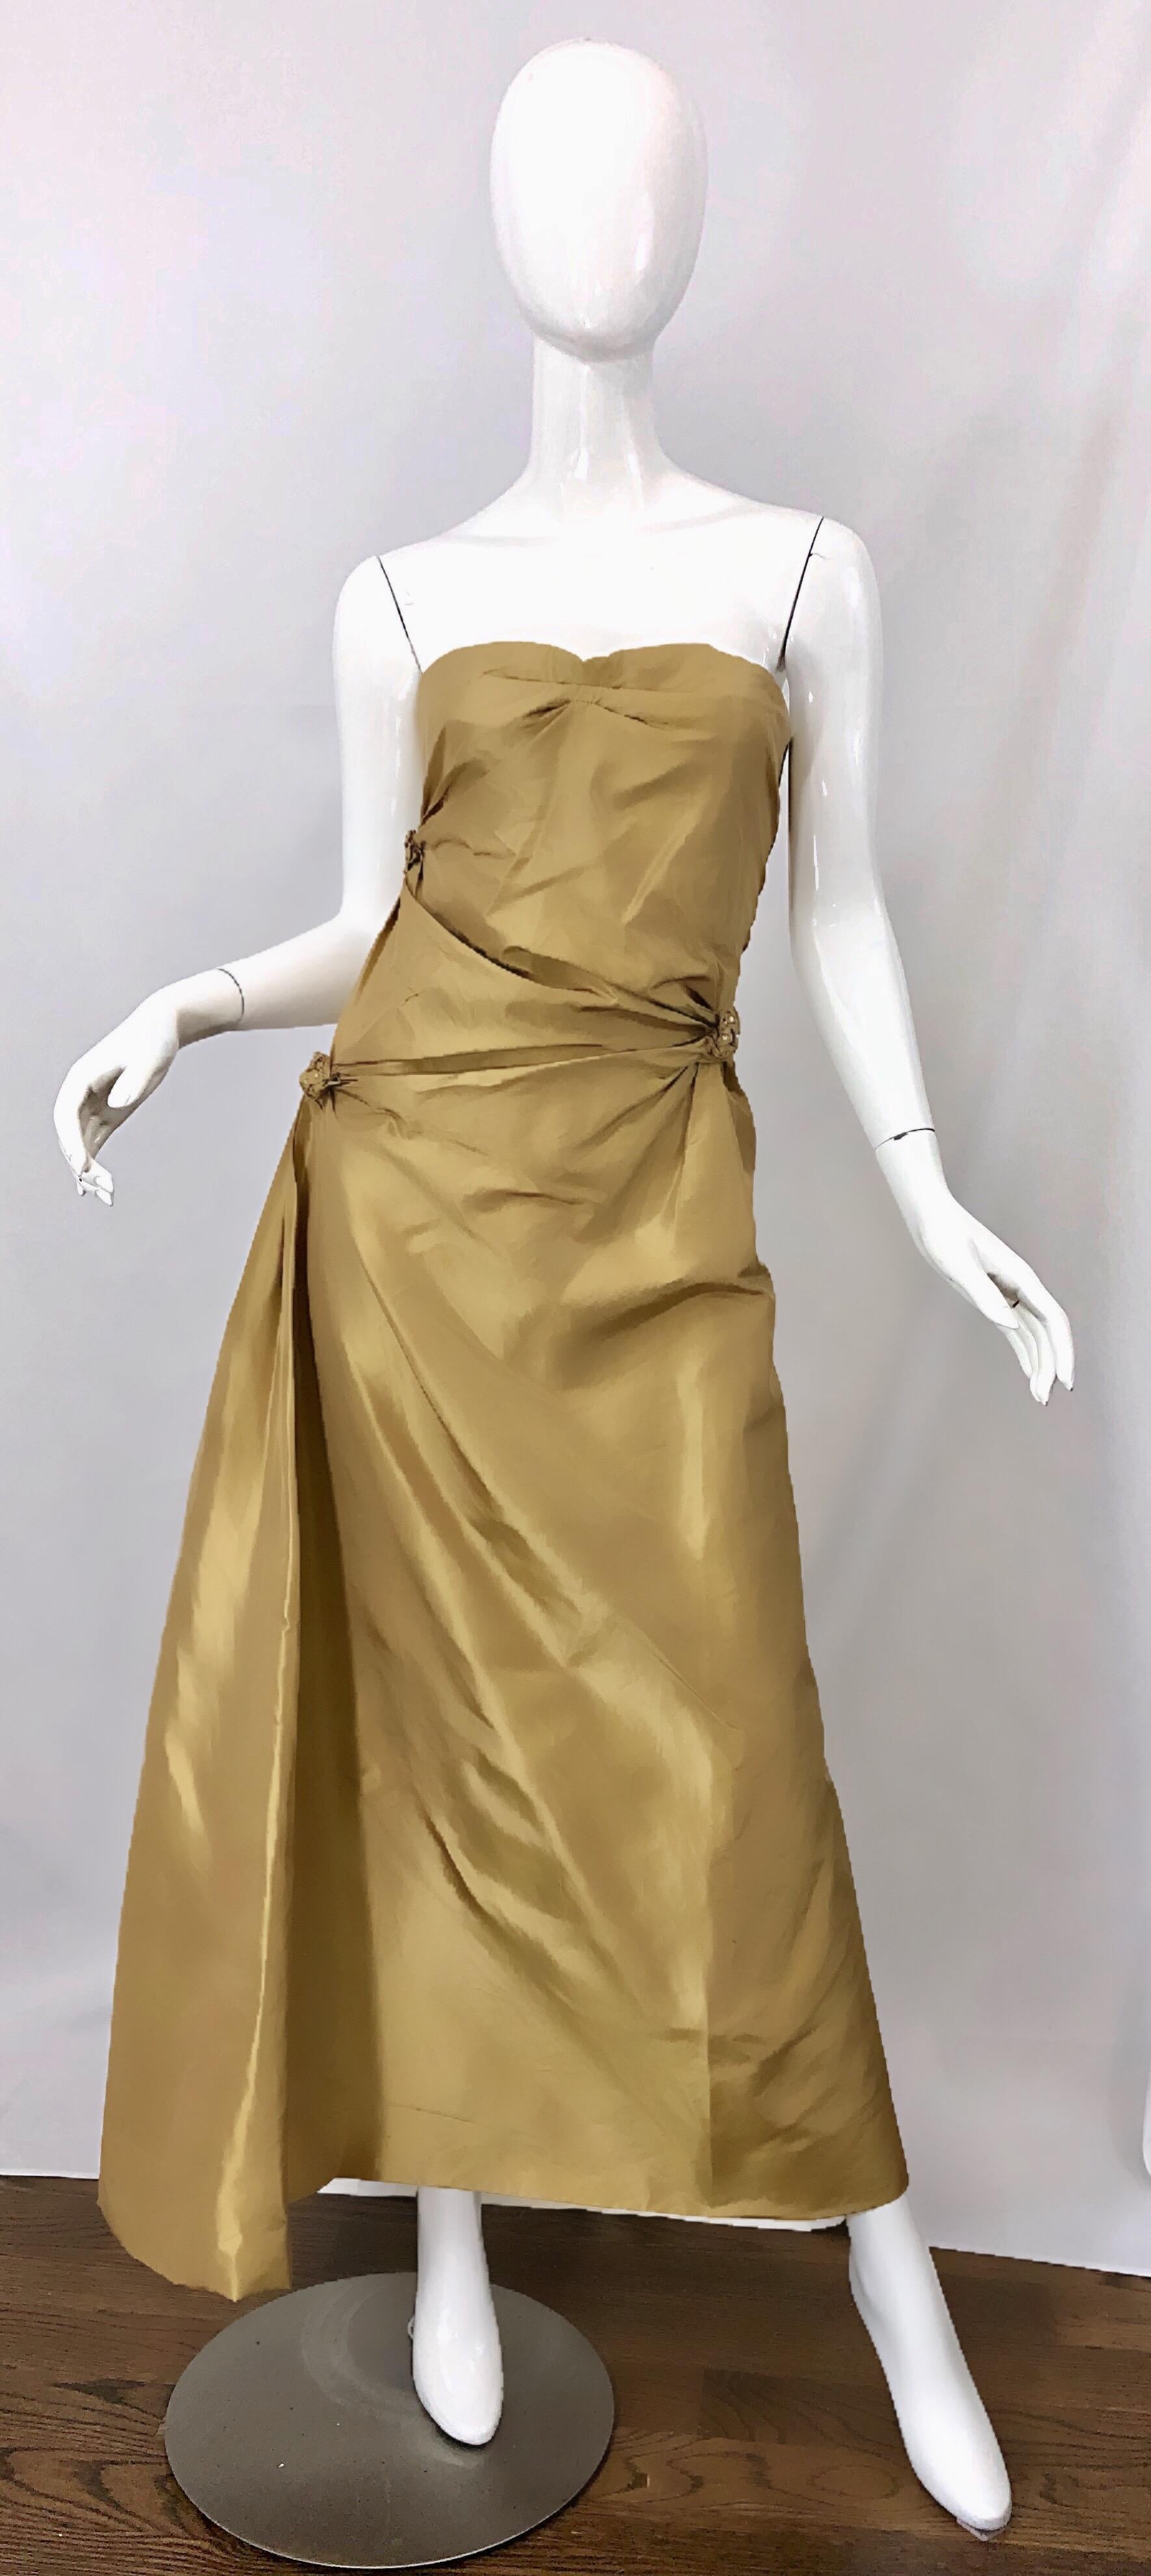 Incredible vintage 1990s PAMELA DENNIS COUTURE muted gold silk taffeta strapless beaded evening gown! Features a strapless interior boned bodice with interior support. Fabulous gathers and drapes throughout with beaded and sequin adorned silk